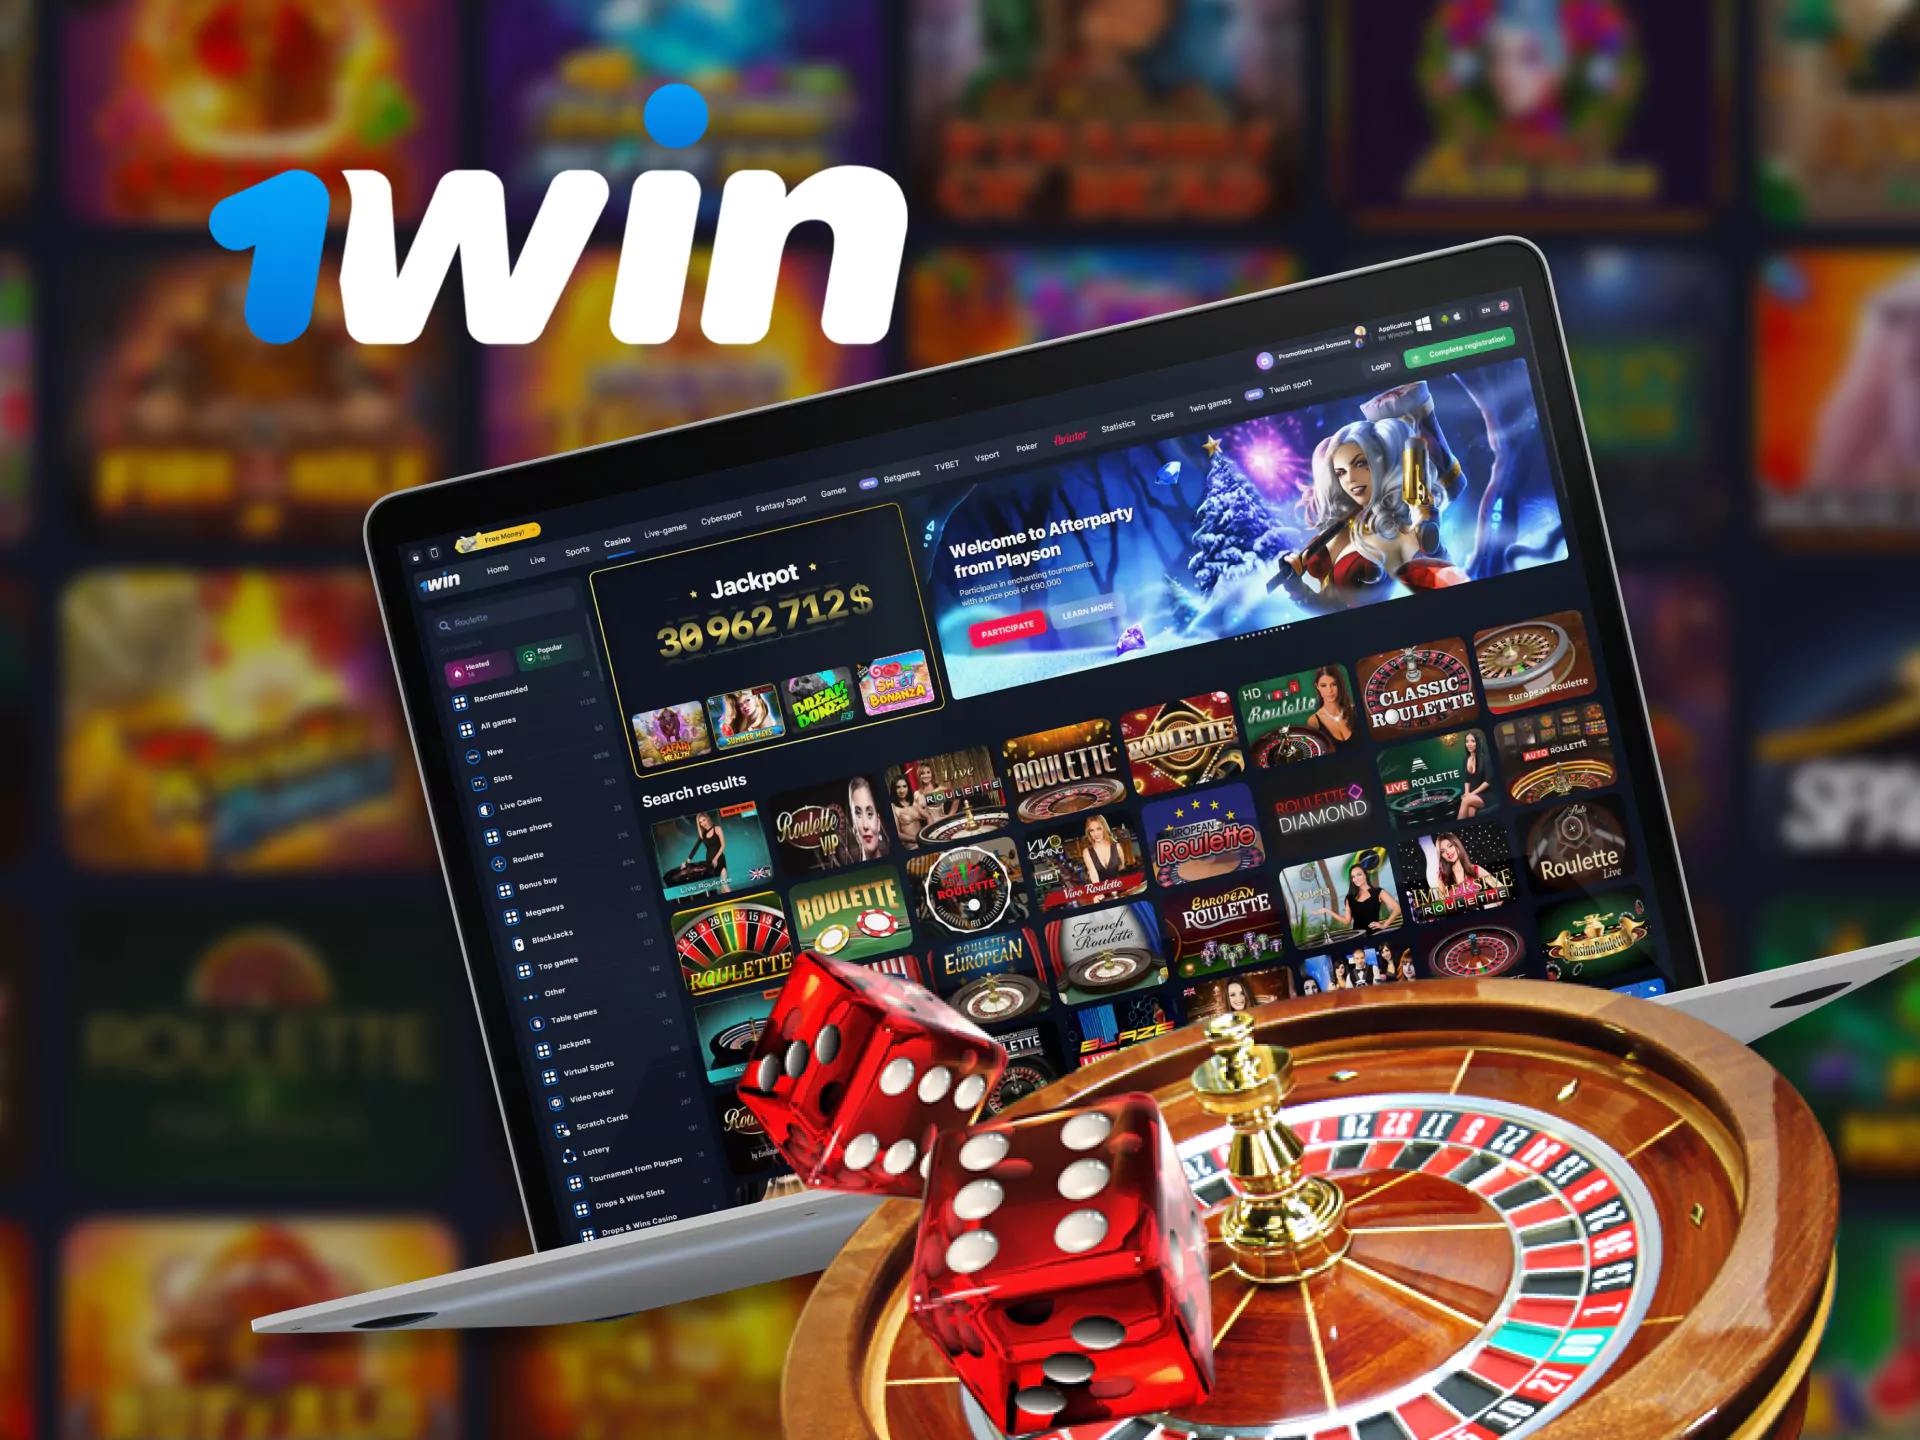 Place a bet on your favorite number in roulette on 1Win.